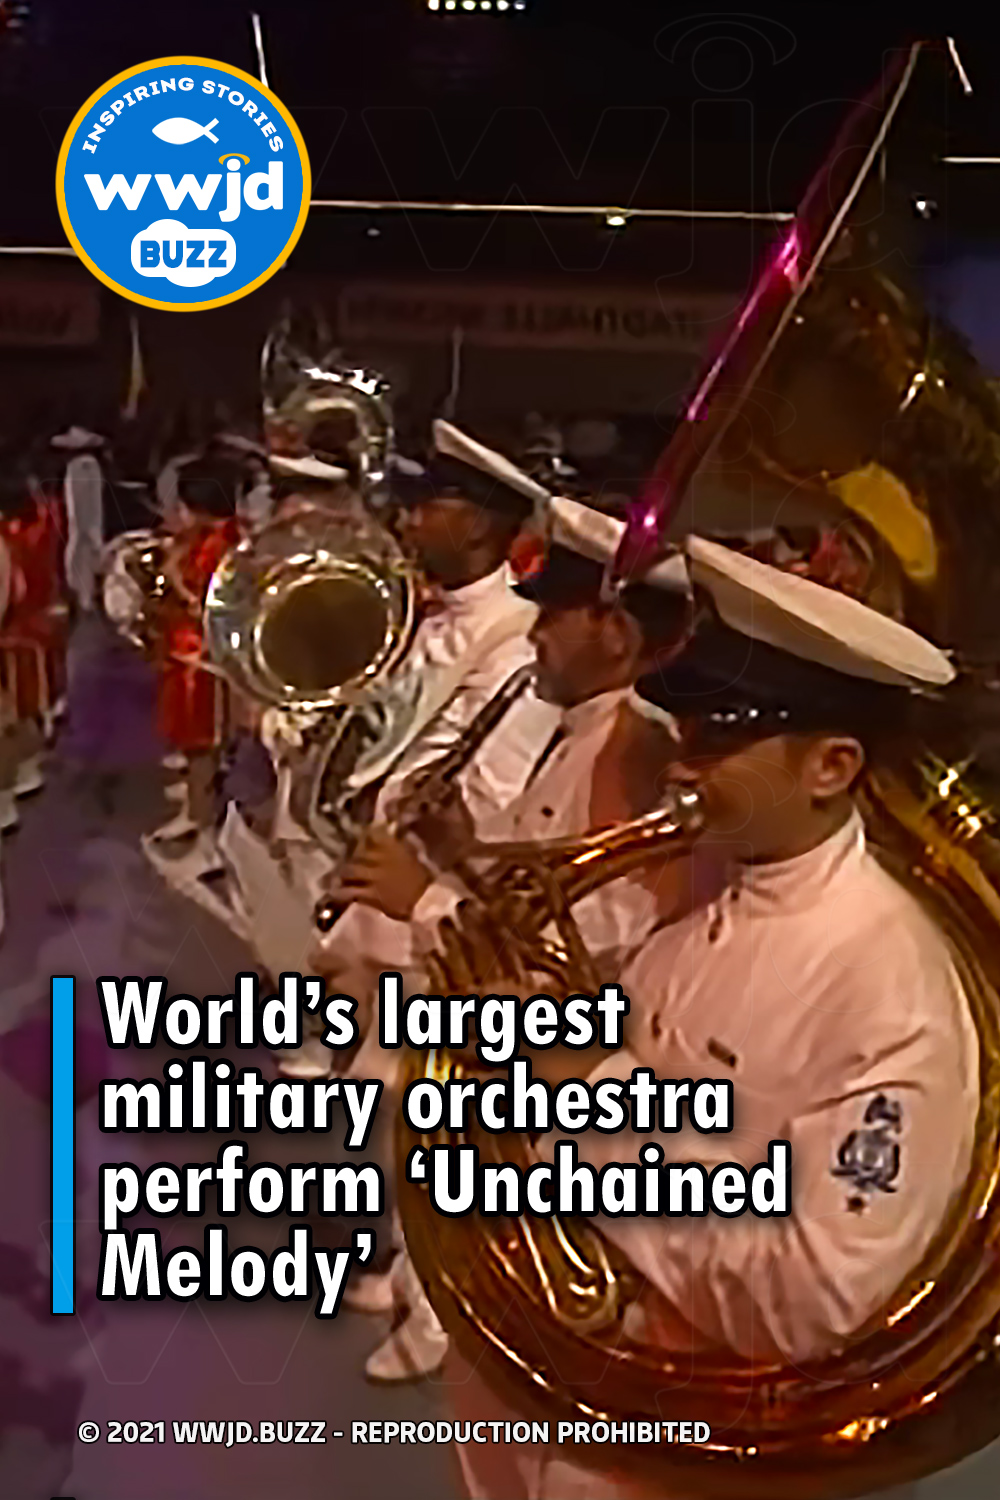 World’s largest military orchestra perform ‘Unchained Melody’